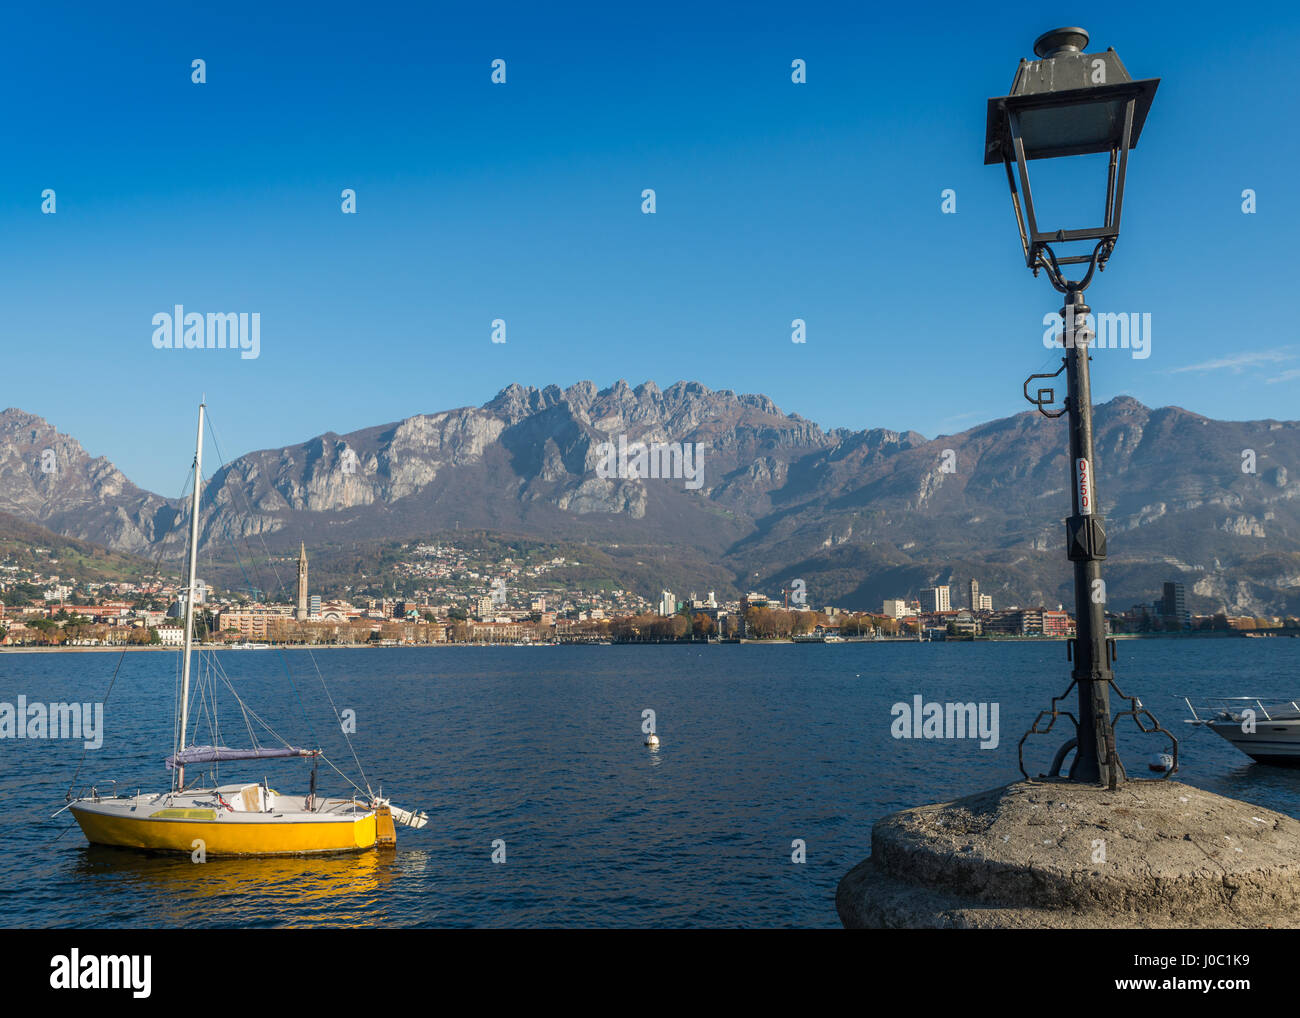 Lake of Lecco, a branch of Lake Como in the southern Alps with the city of Lecco in the background, Lombardy, Italy Stock Photo